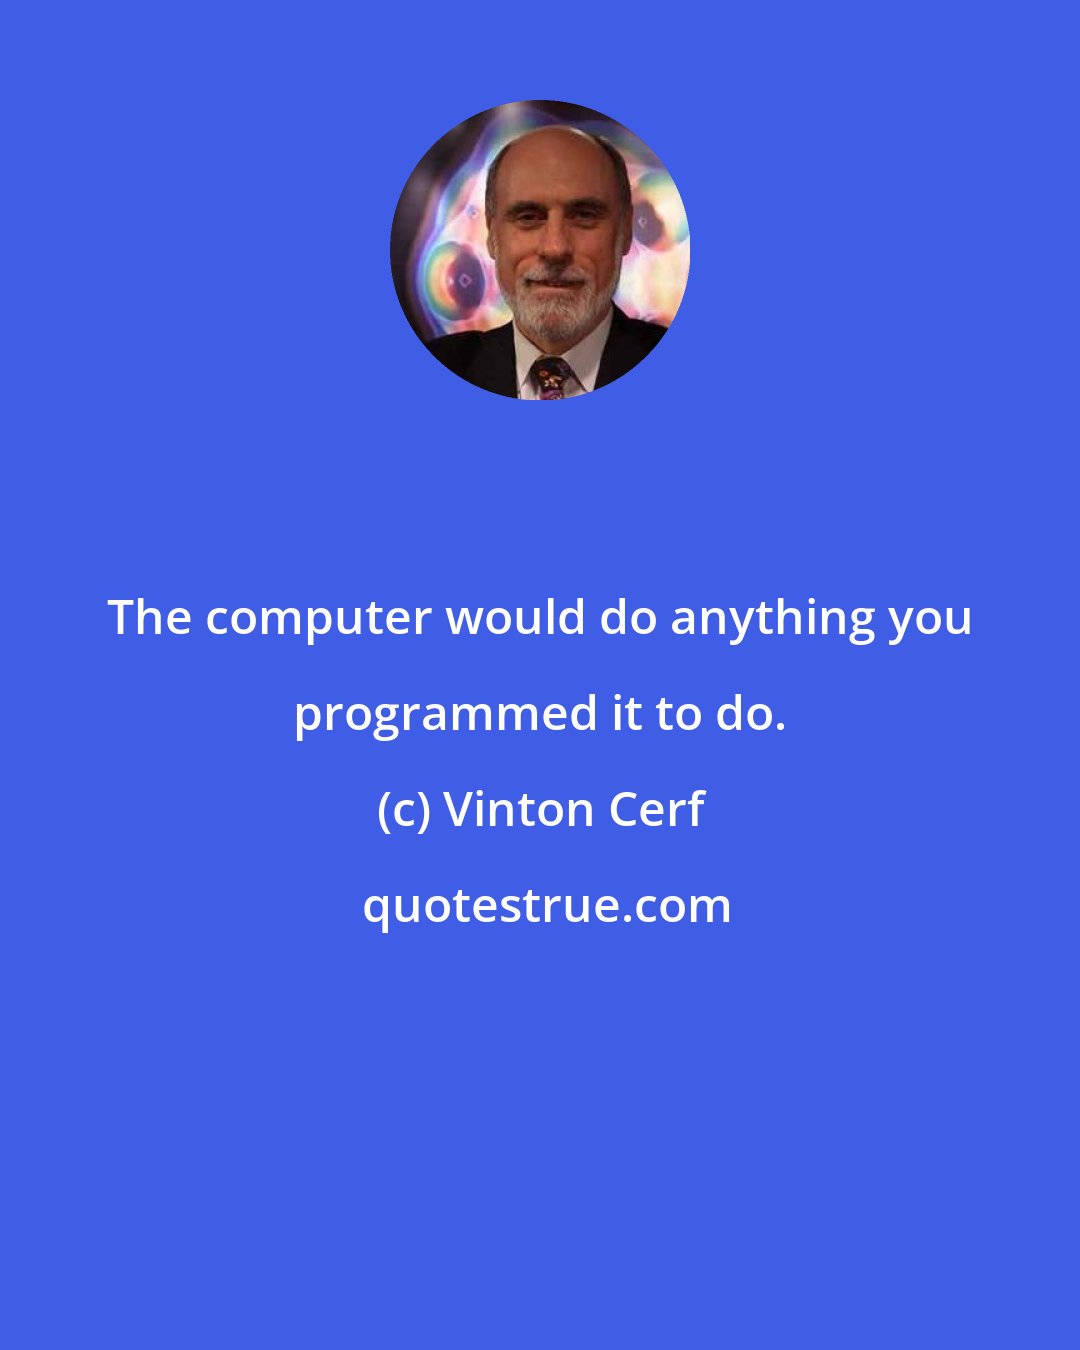 Vinton Cerf: The computer would do anything you programmed it to do.